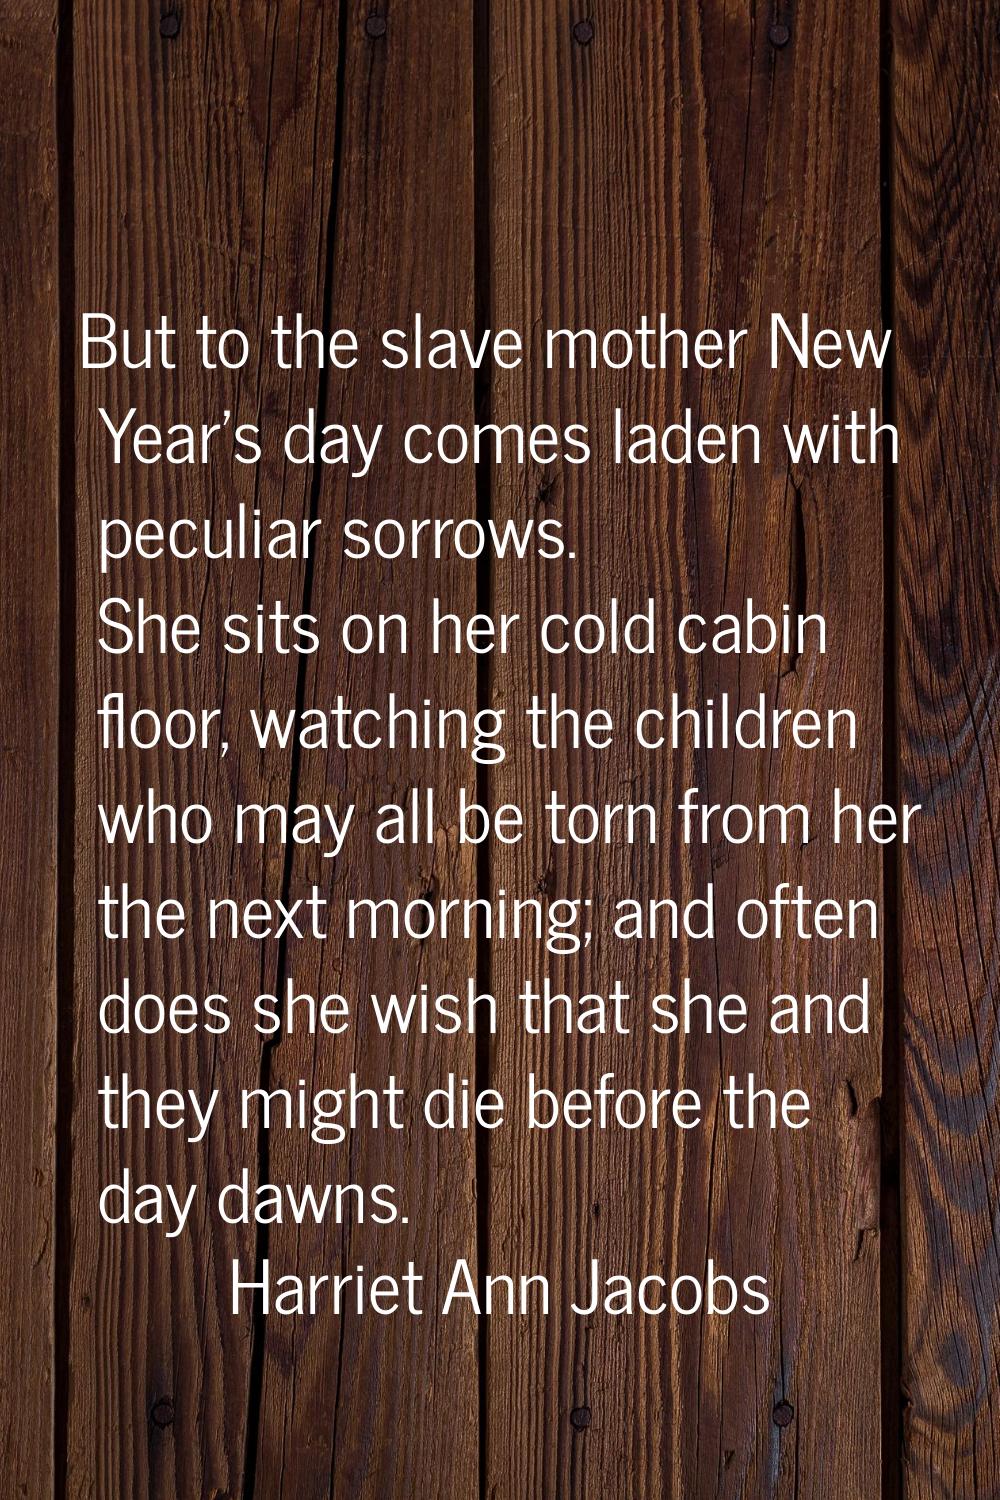 But to the slave mother New Year's day comes laden with peculiar sorrows. She sits on her cold cabi